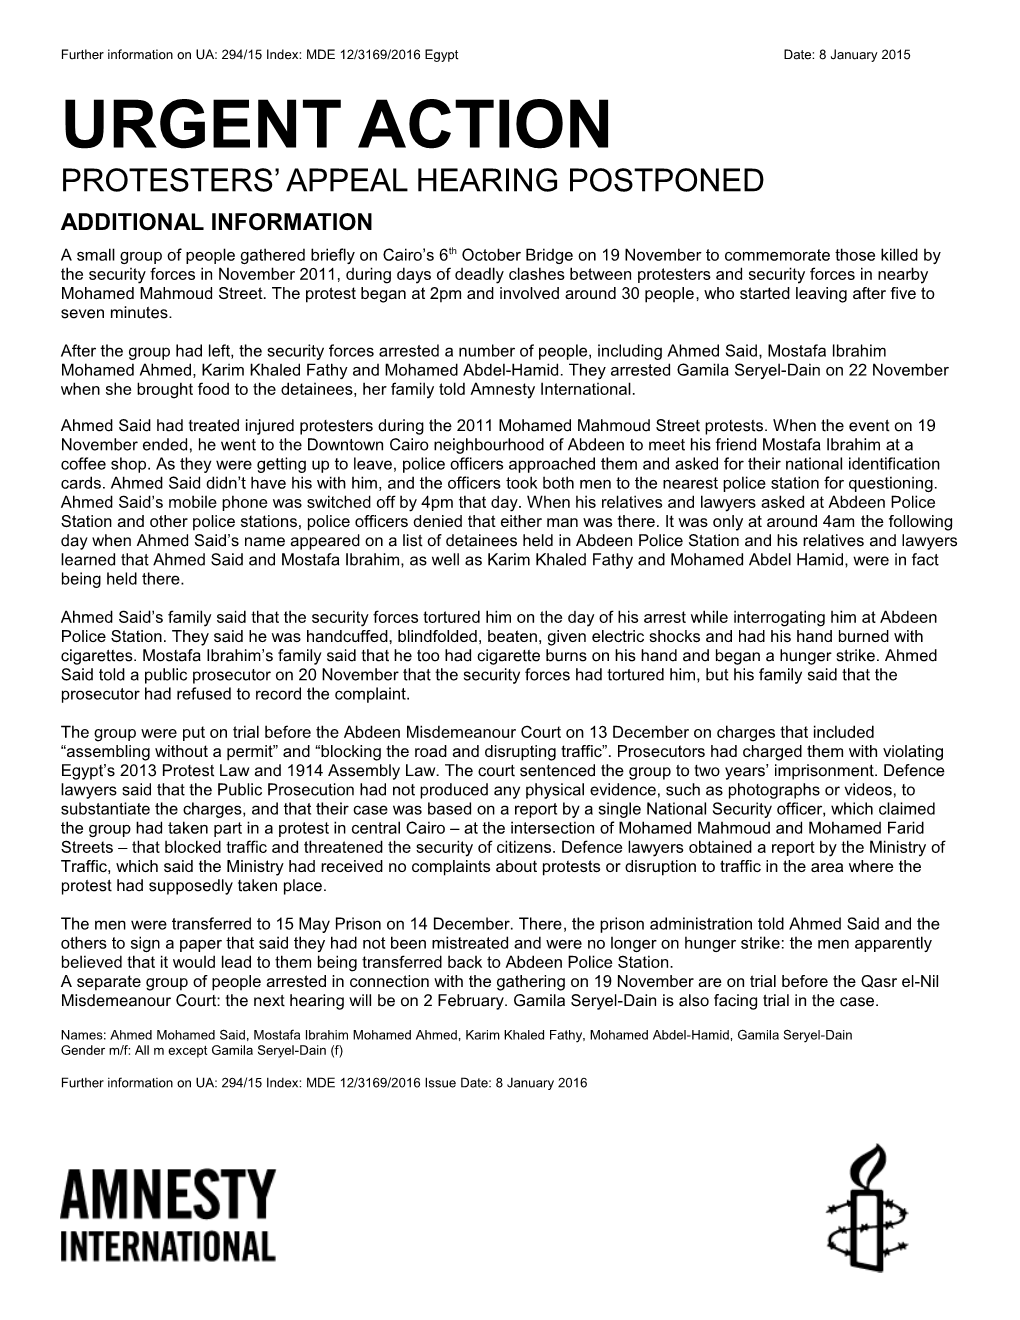 Protesters Appeal Hearing Postponed